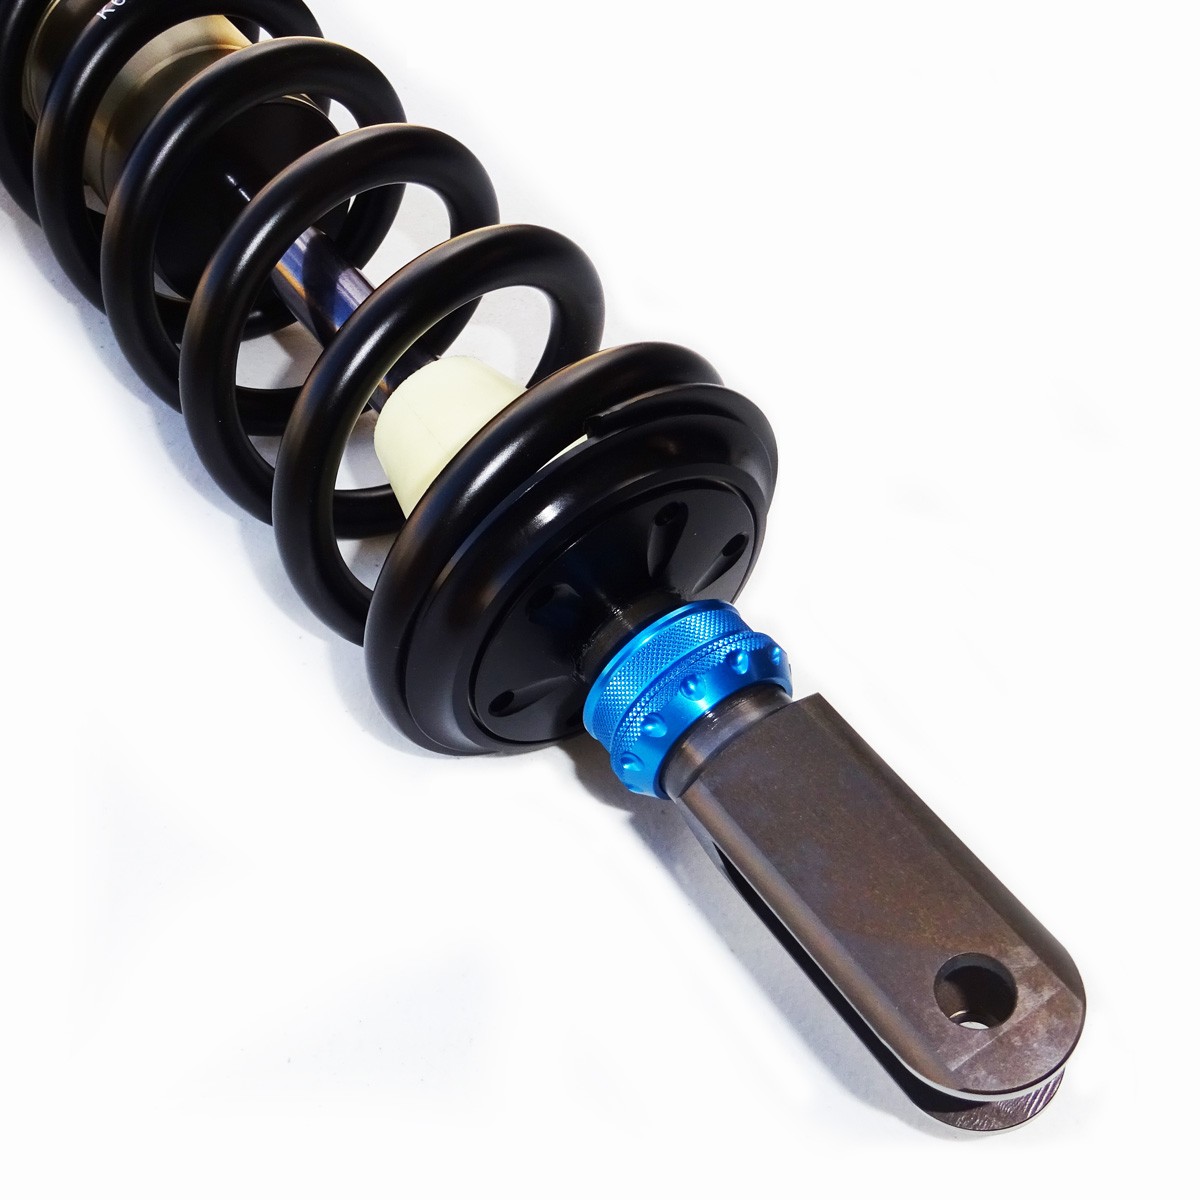 Lainer Suspension Impact18 Rear Shock Absorber KTM , Husqvarna , Gas Gas ( Spring Not Included )